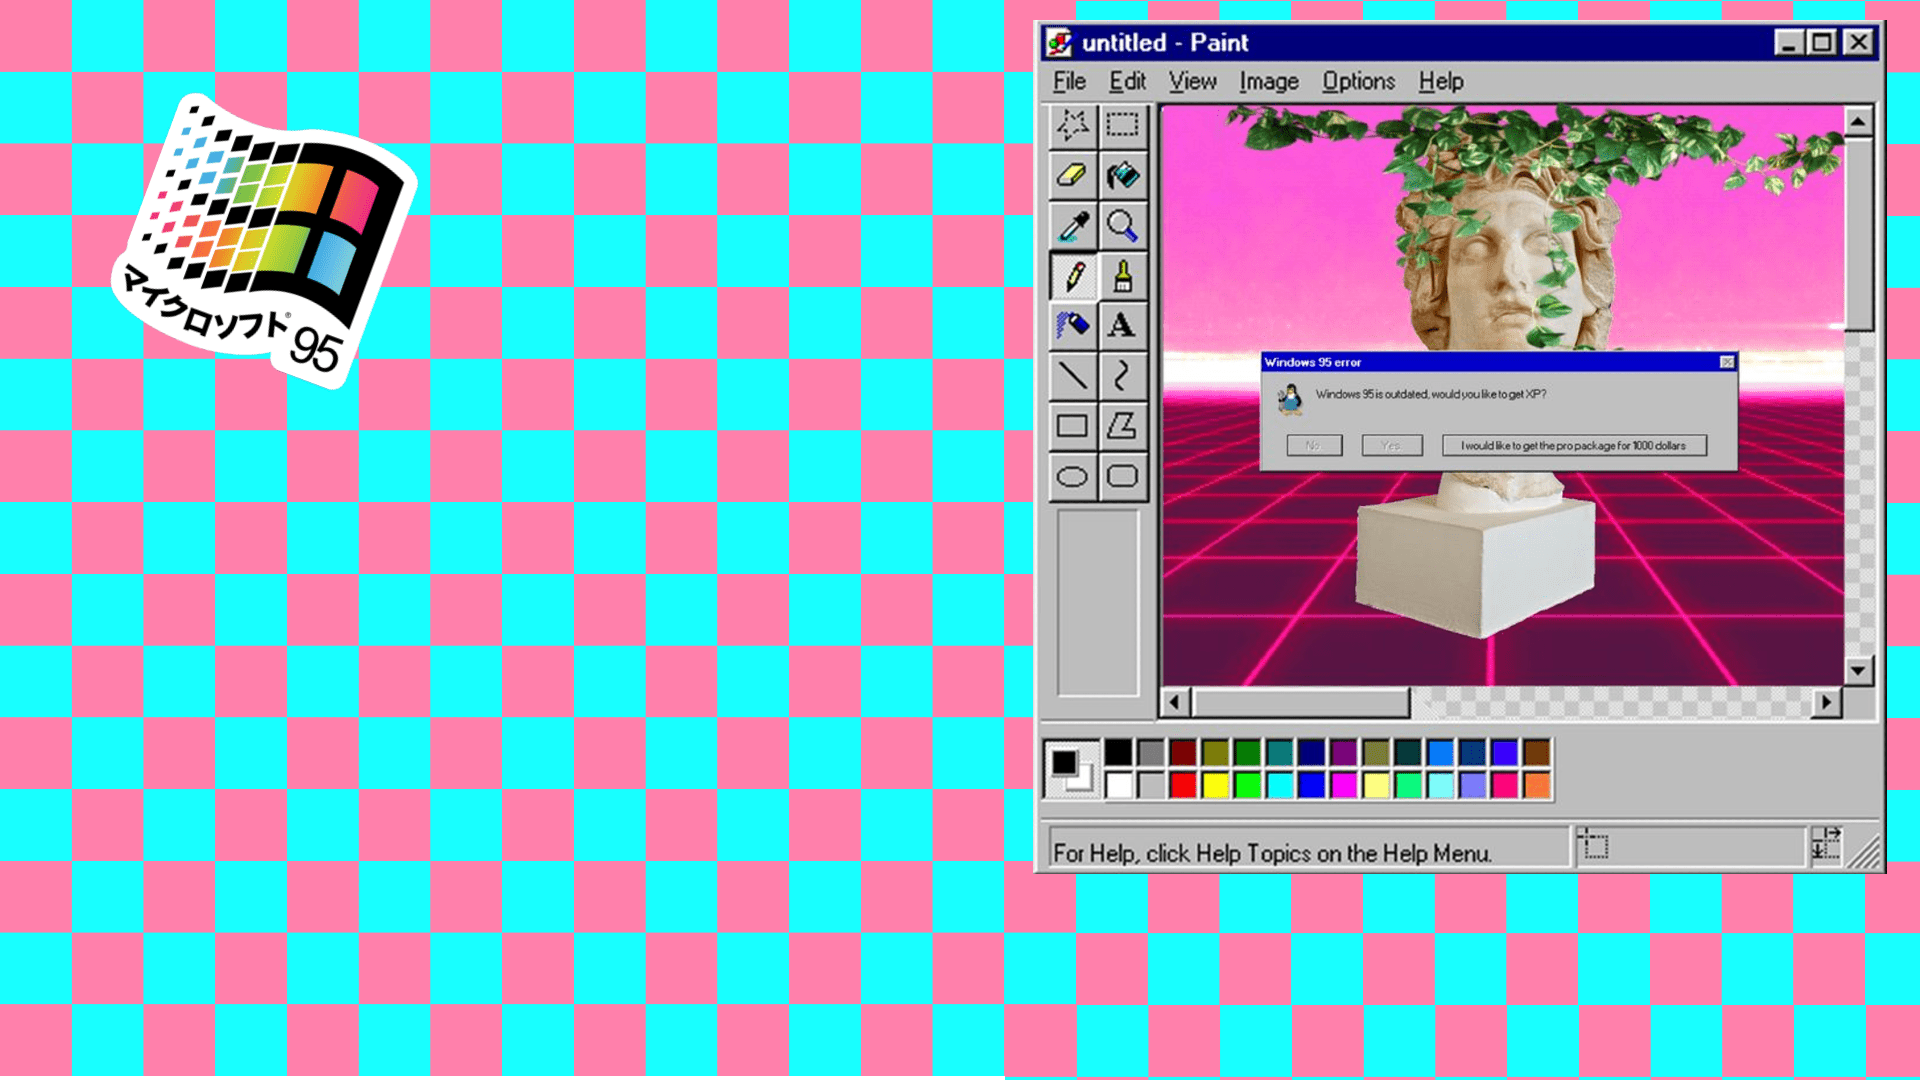 A Windows 95 operating system screen with a pink and blue checkered background - Windows 95